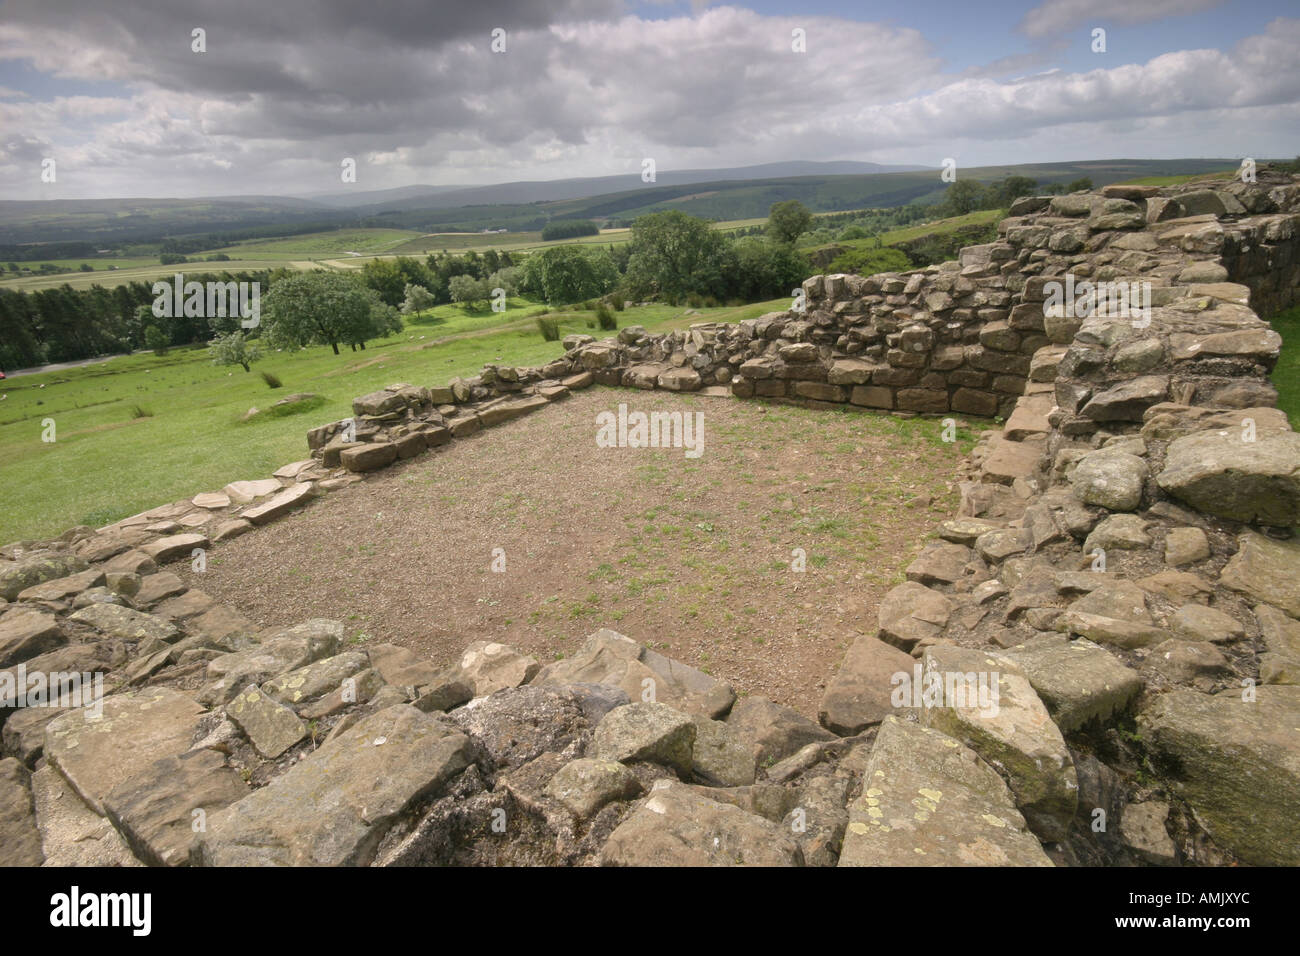 A Stock Photograph of a Milecastle on Hadrian s Wall in Northumbria UK Stock Photo